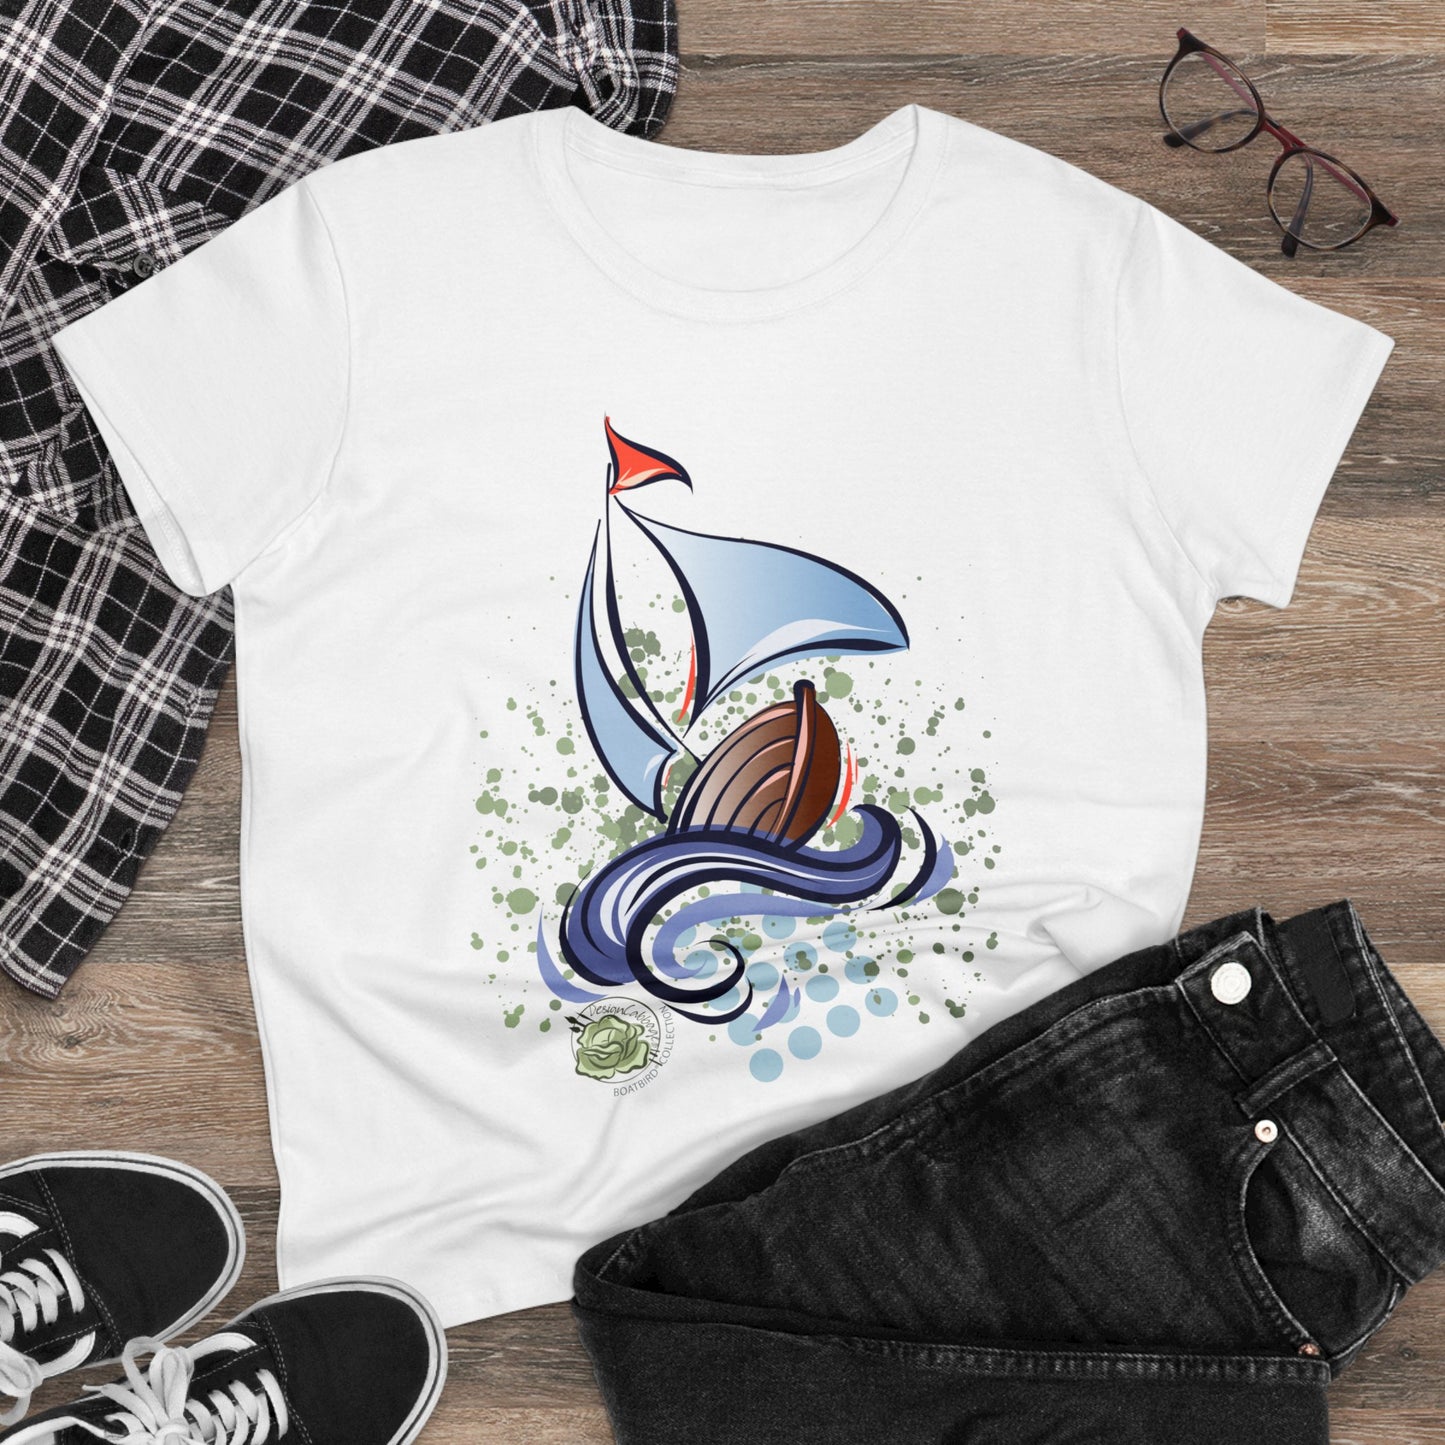 Sailboat Graphic T-Shirt - BoatBird® Collection - Women's Tee